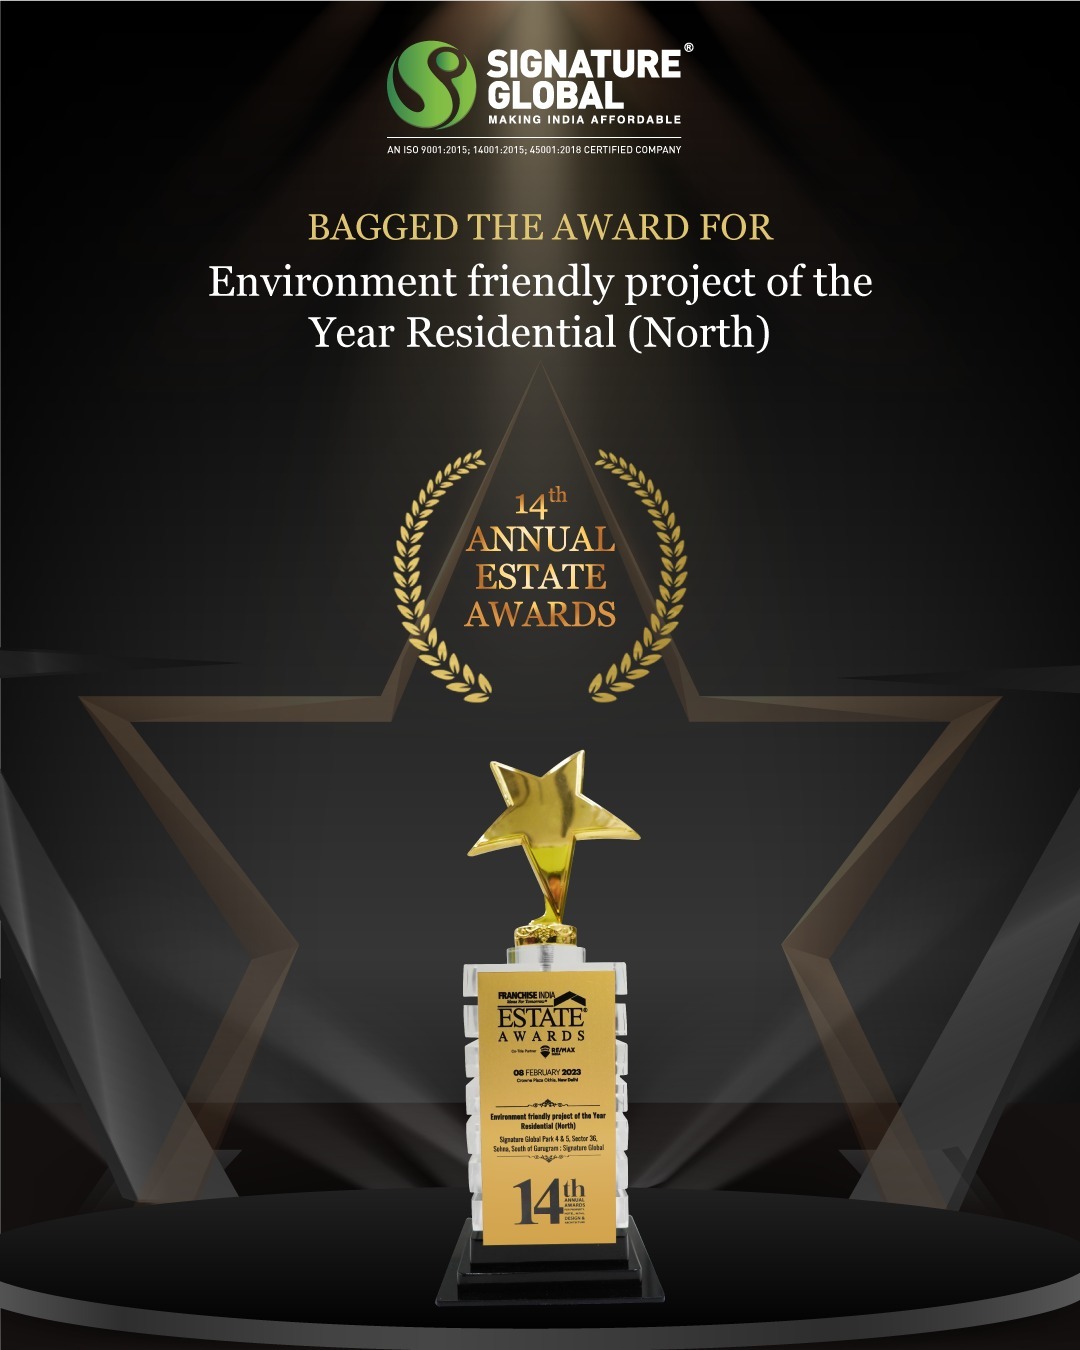 Signature Global Bagged The Award For Environment friendly project of the Year Residential (North) Update